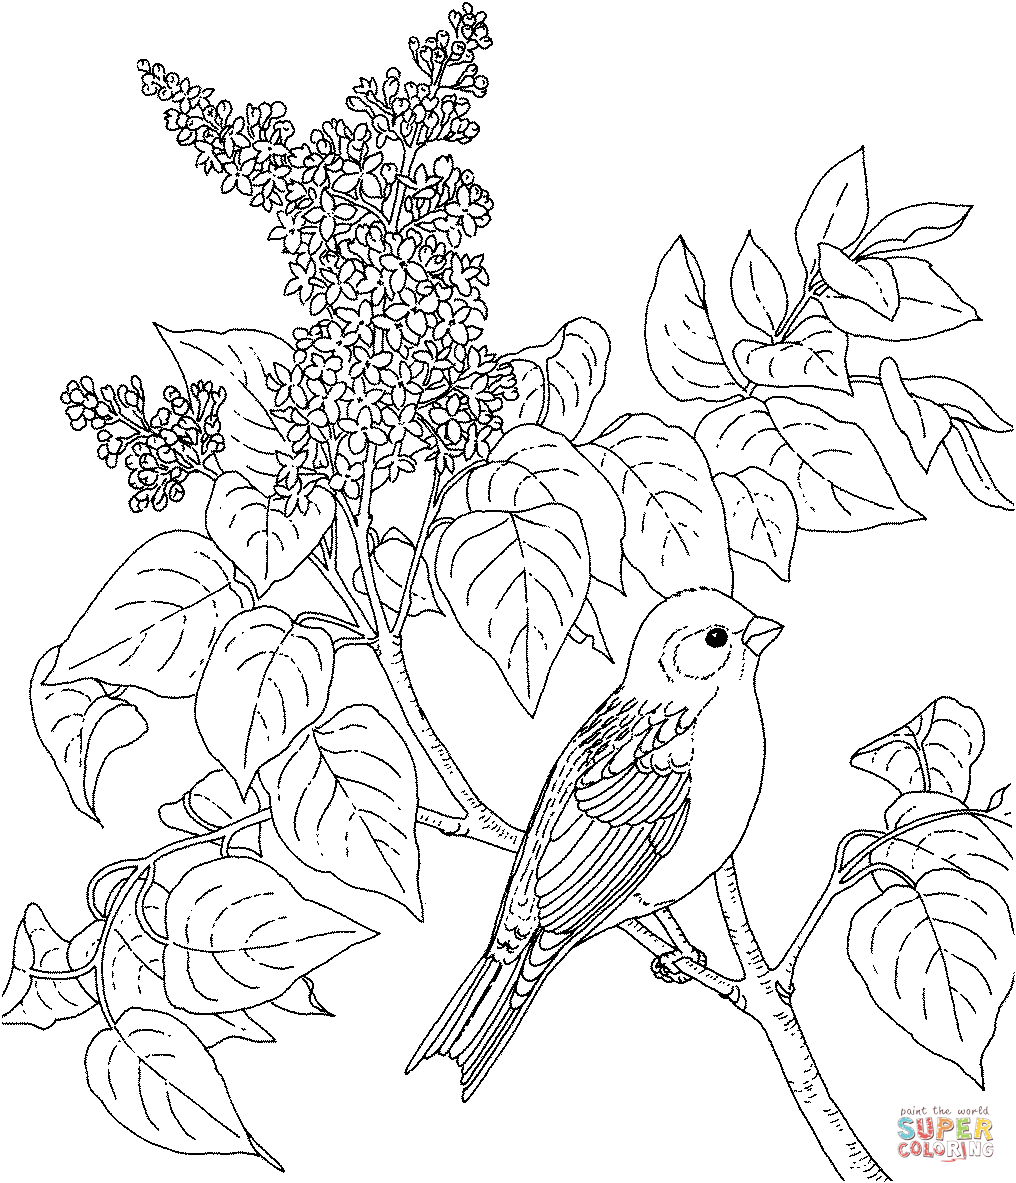 New hampshire purple finch and purple lilac coloring page free printable coloring pages